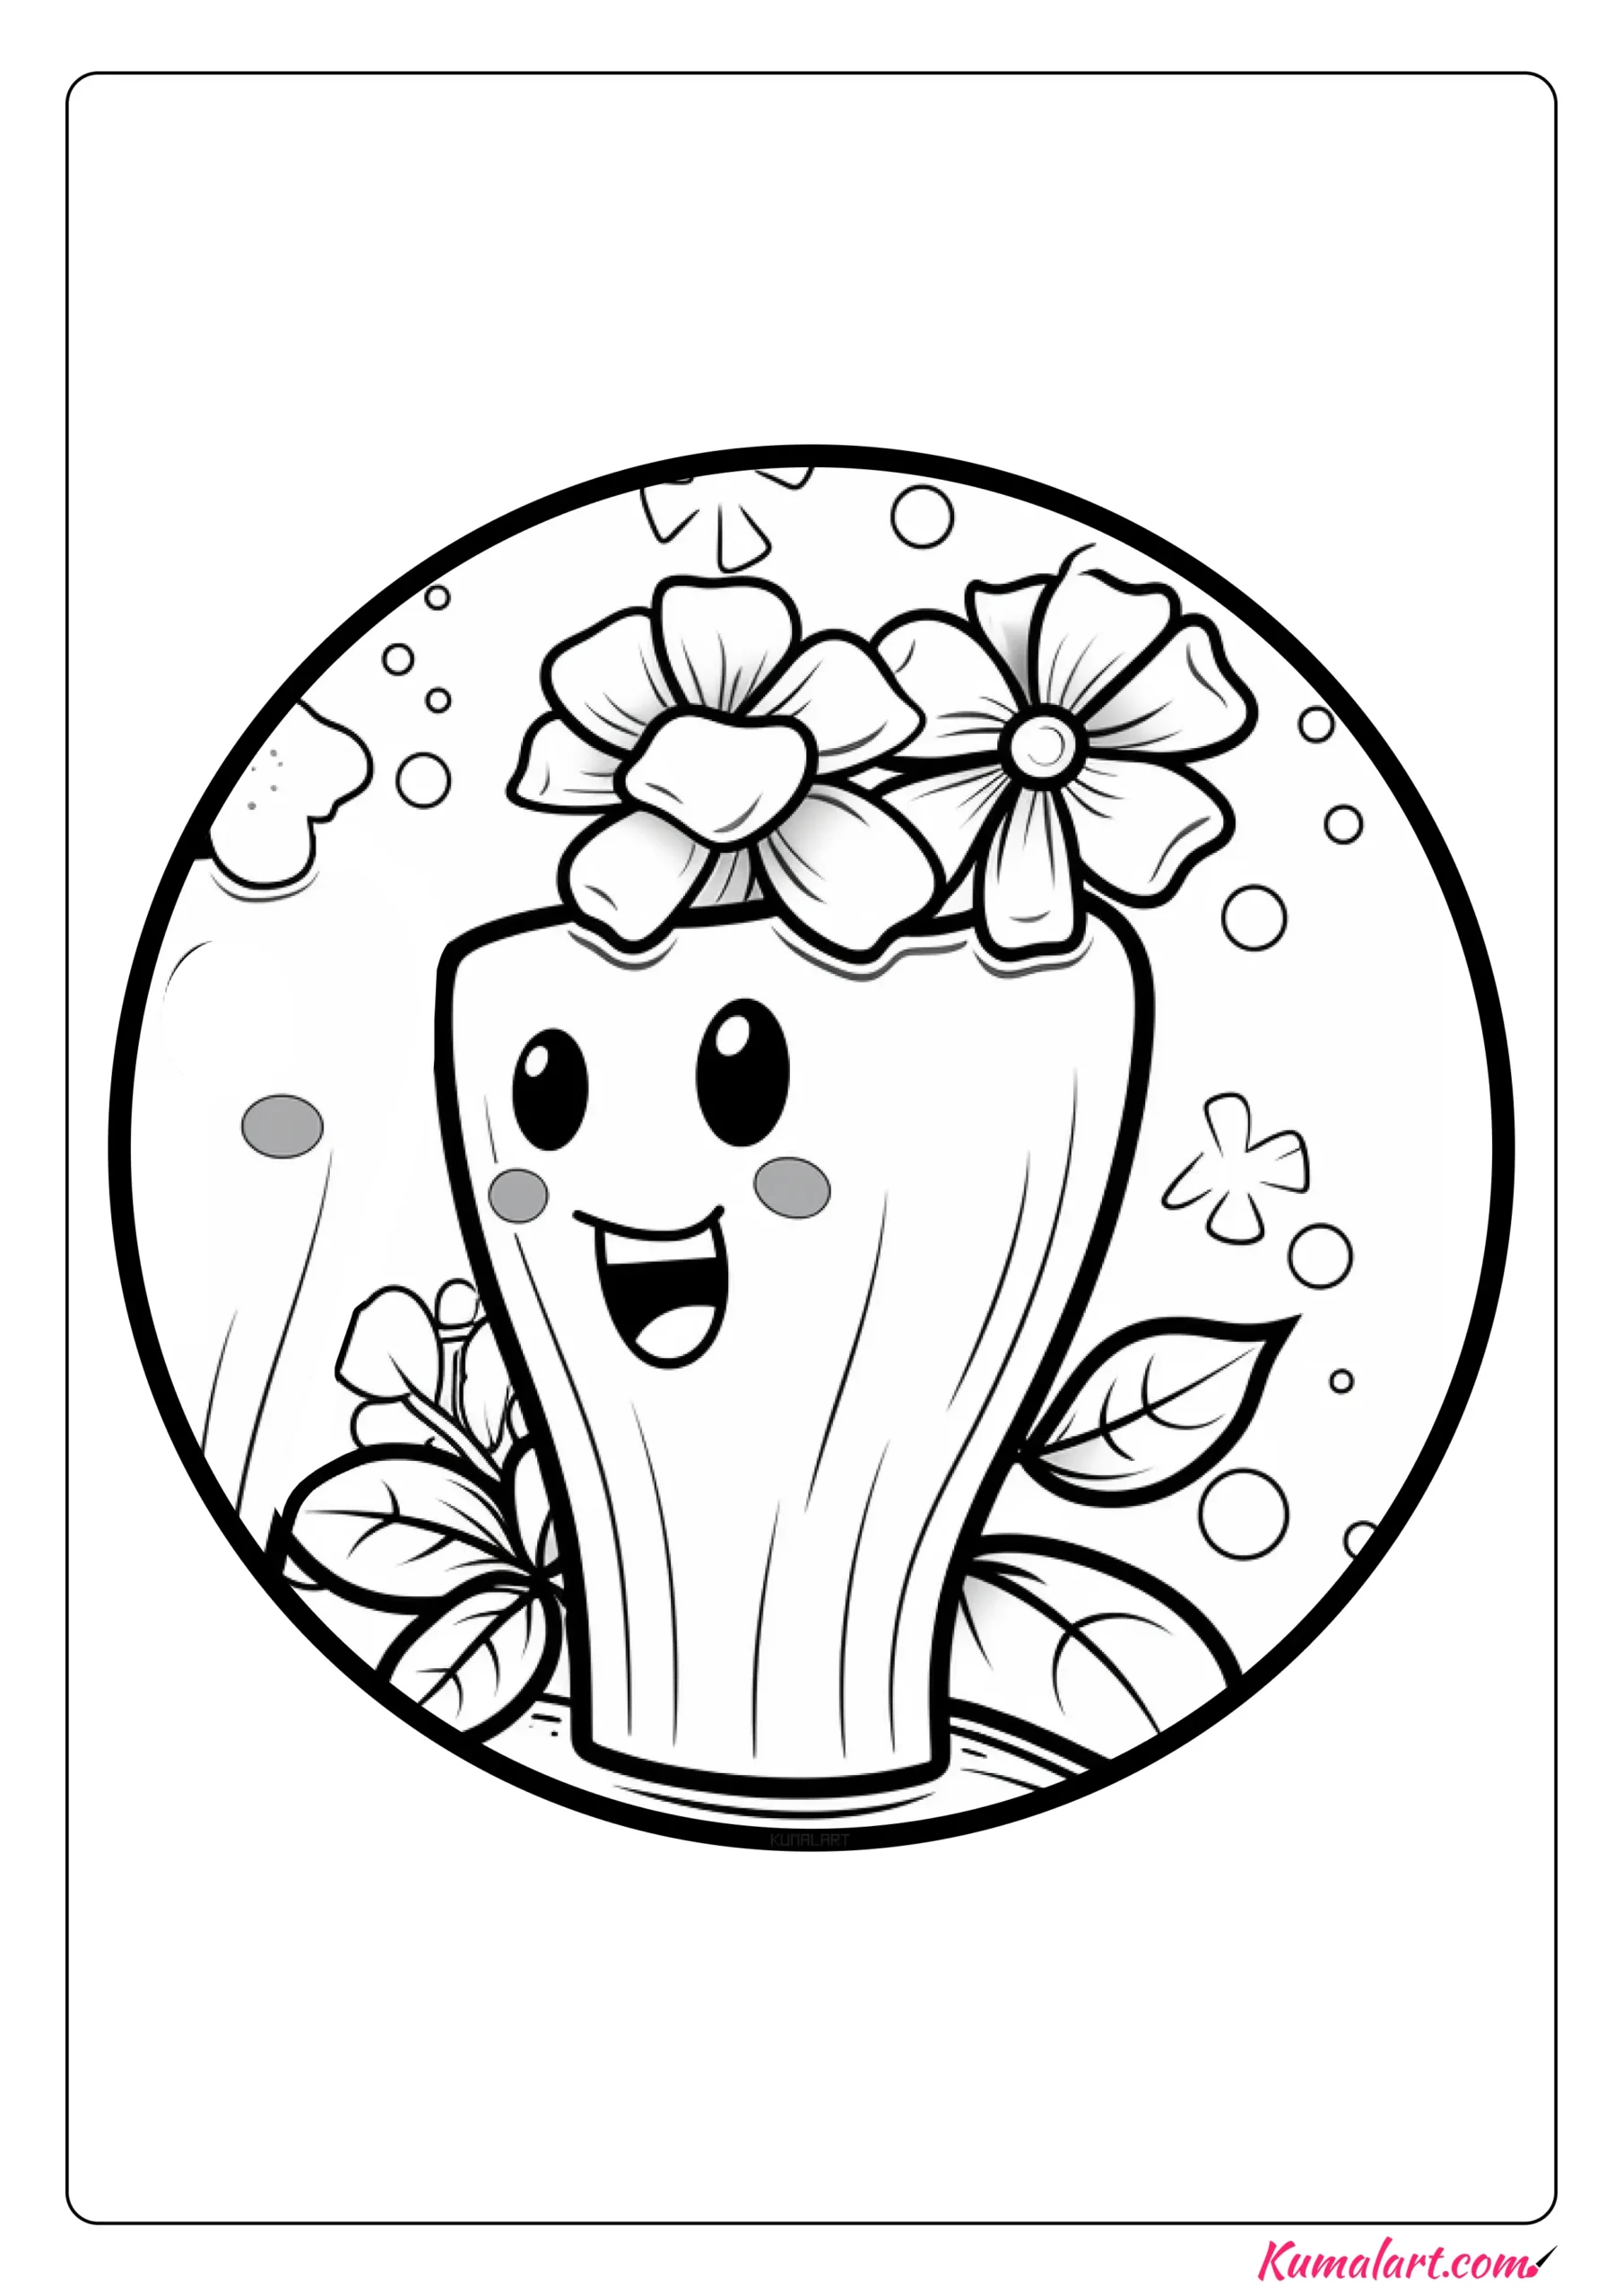 Delicate Tooth Brushing Coloring Page